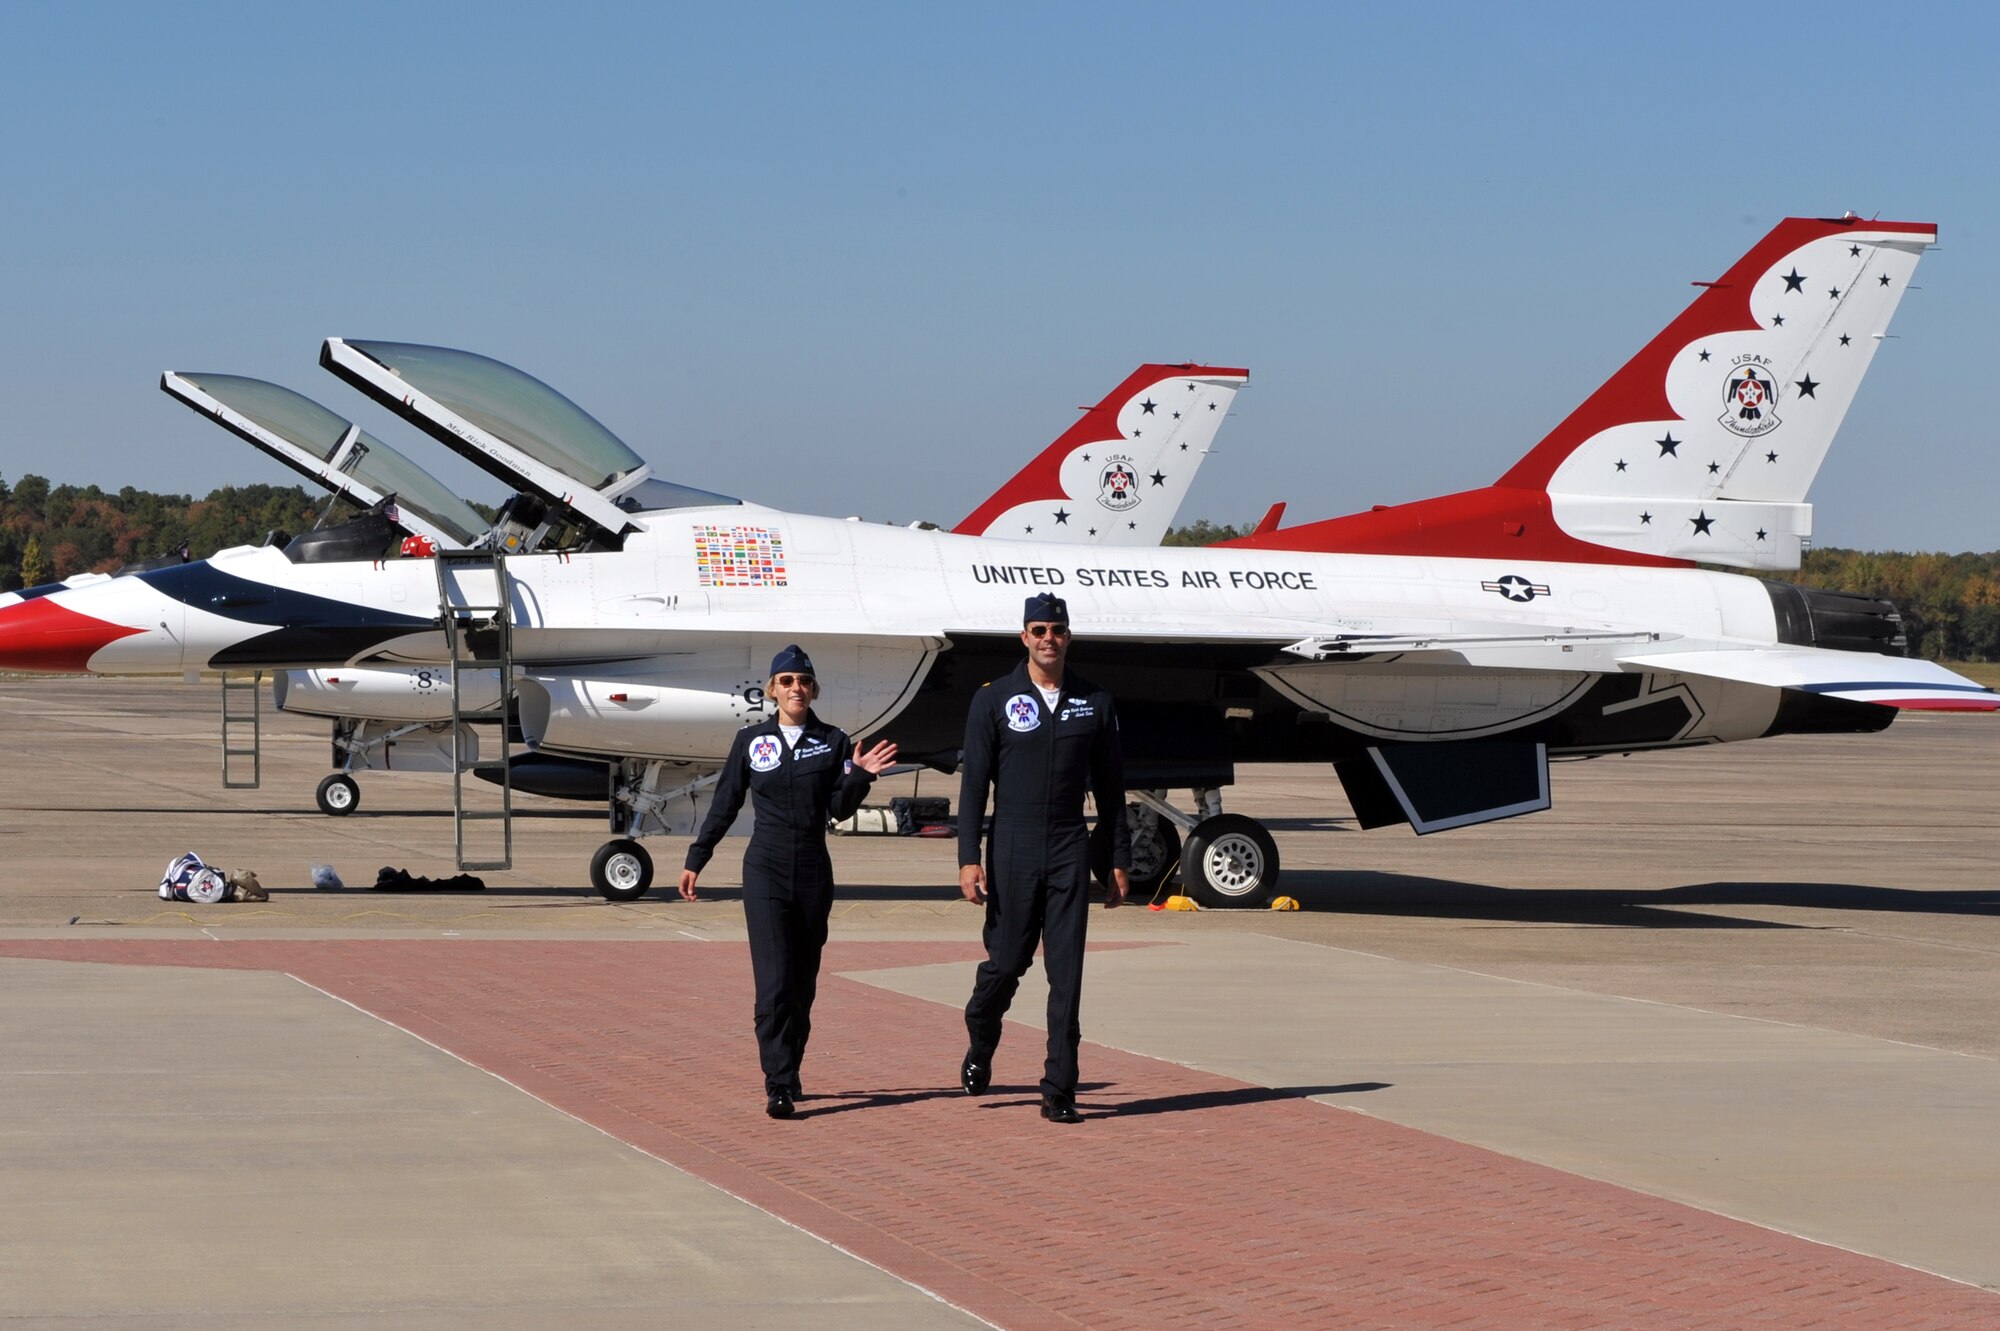 Maj. Rick Goodman, No. 5, and Capt. Kristin Hubbard, No. 8, both members of the Air Force Thunderbirds F-16 demonstration team, walk towards base operations after landing on the base flightline Oct. 6. The Air Force Thunderbirds F-16 demonstration team is headlining the base’s air show Oct. 9-10.  (U.S. Air Force photo by Staff Sgt. Chris Willis)